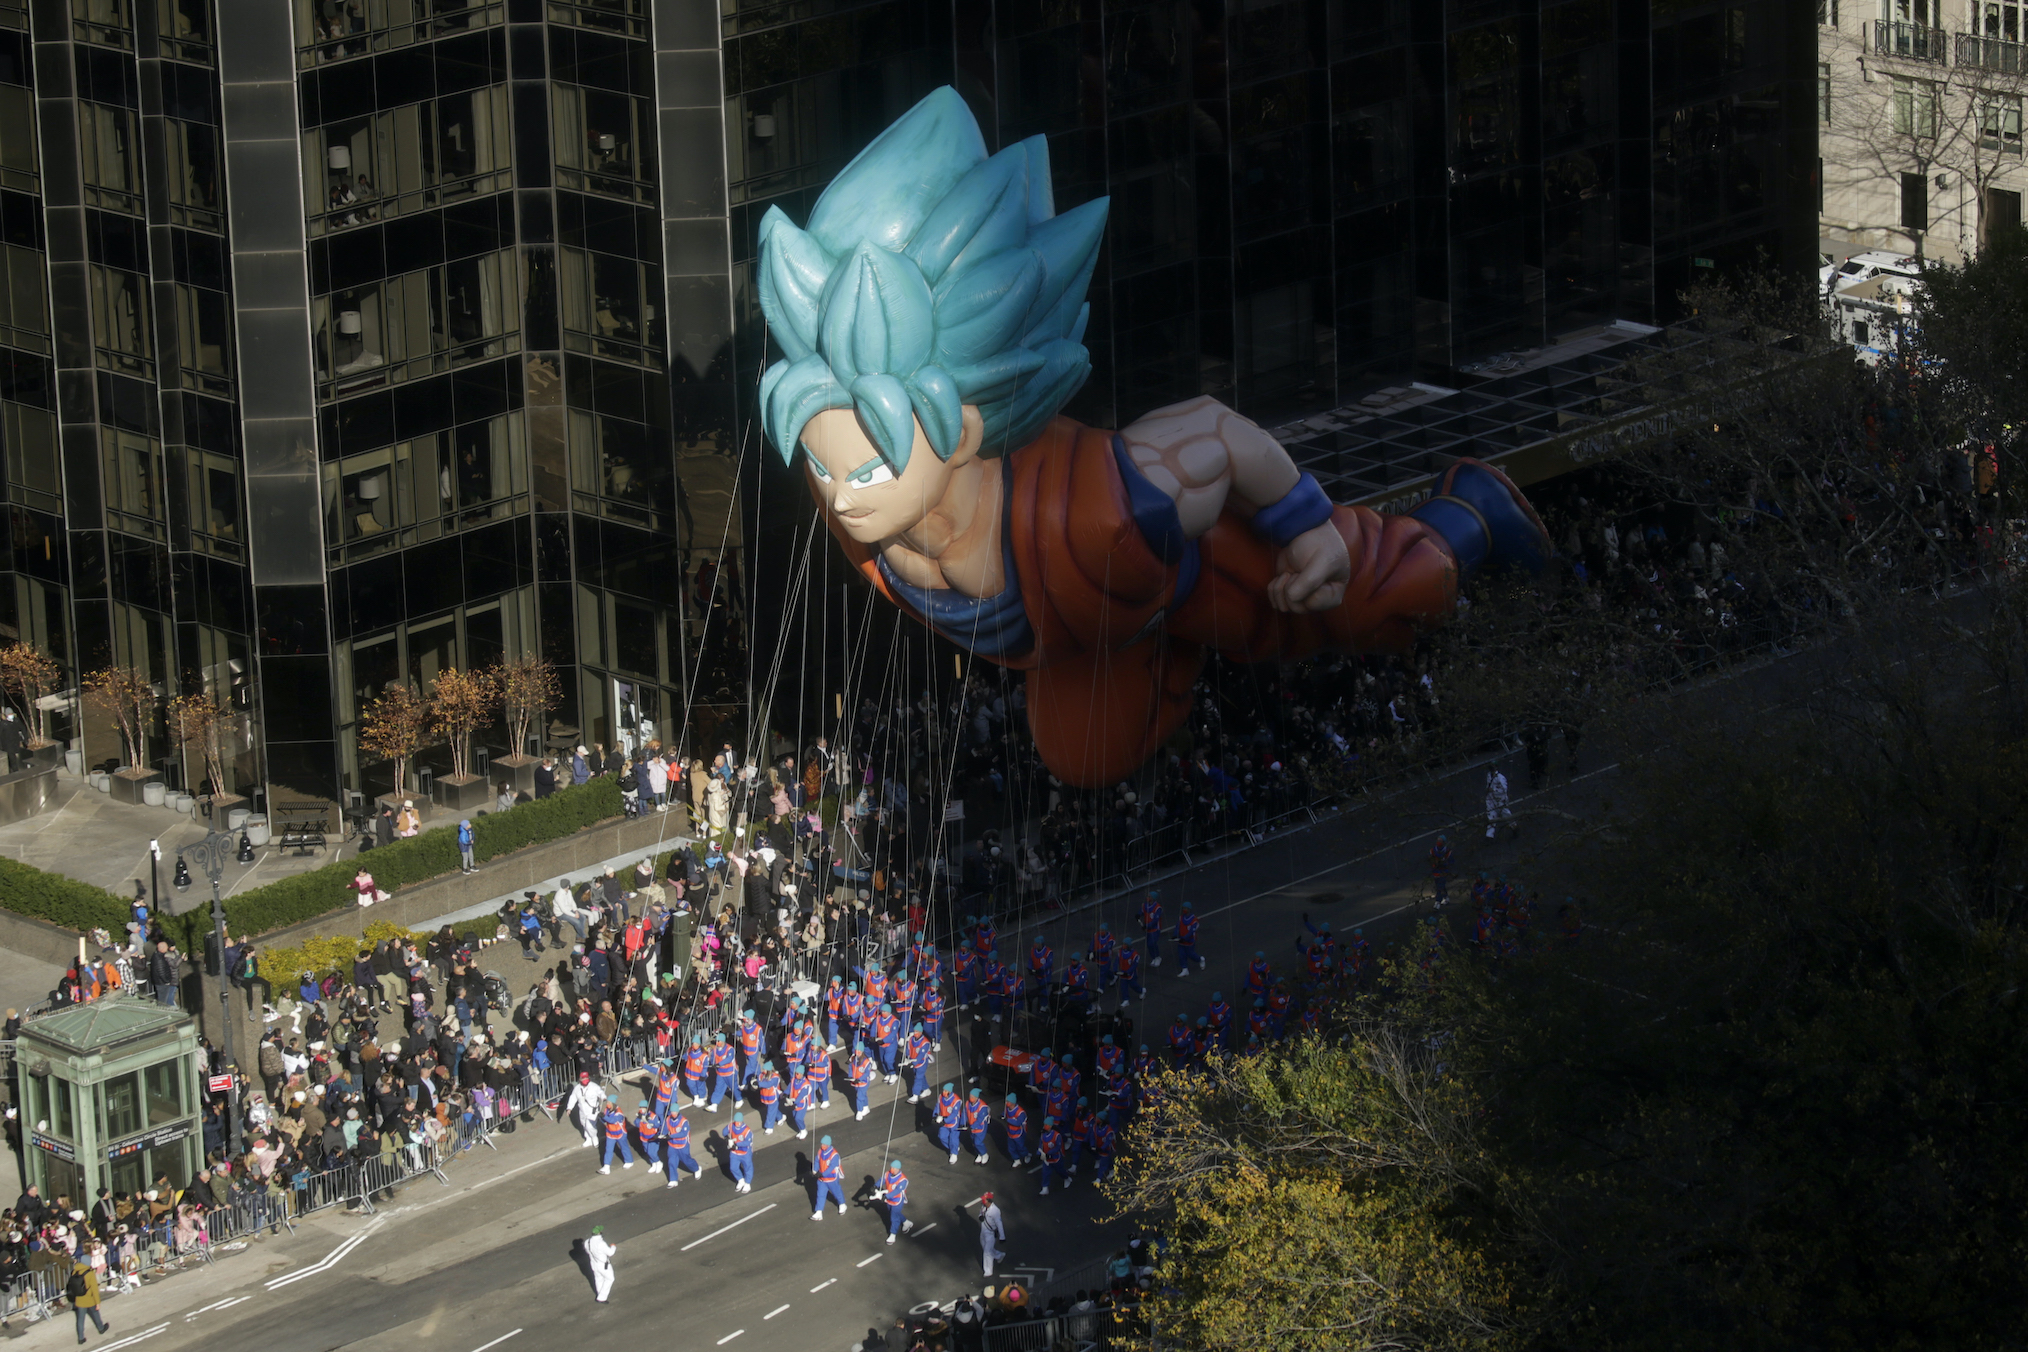 Goku balloon floats during the 95th-annual Macy’s Thanksgiving Day Parade on November 25, 2021 in New York City.